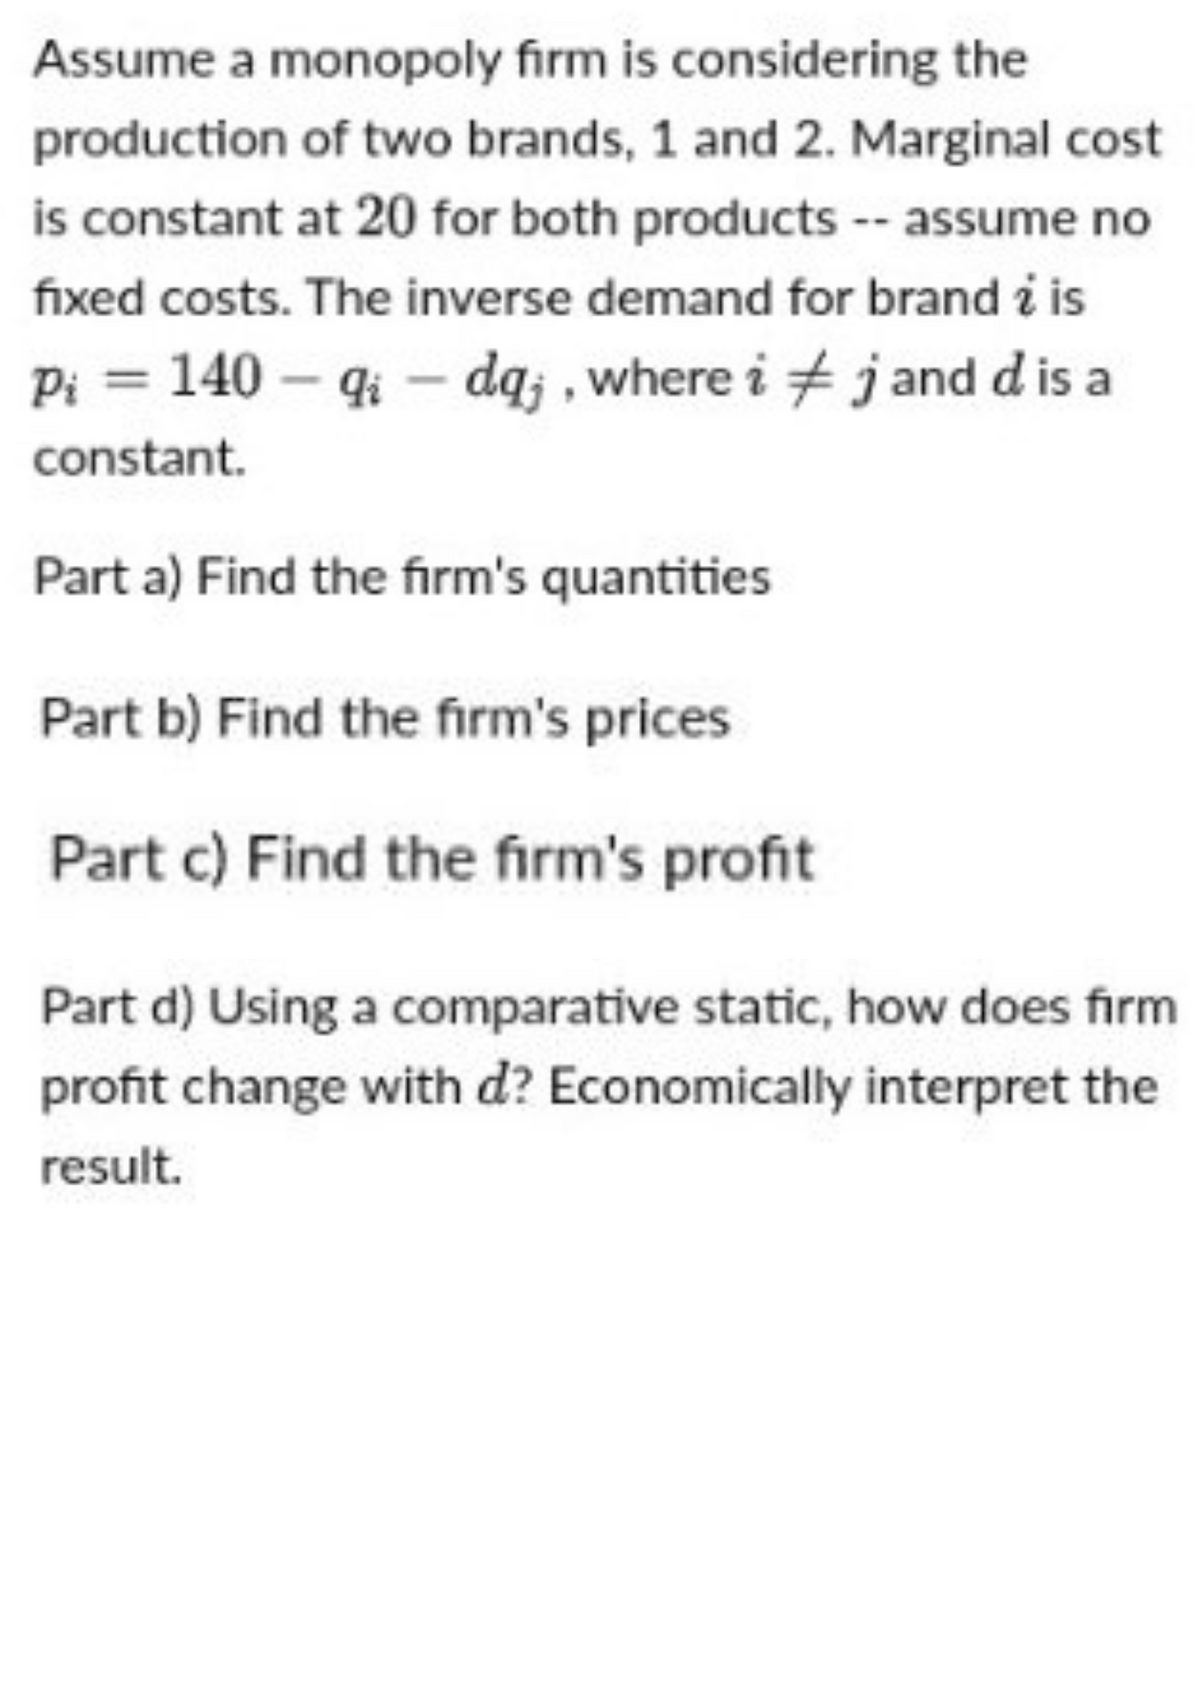 Assume a monopoly firm is considering the
production of two brands, 1 and 2. Marginal cost
is constant at 20 for both products -- assume no
fixed costs. The inverse demand for brand i is
Pi = 140 - qidq;, where i
j and d is a
constant.
Part a) Find the firm's quantities
Part b) Find the firm's prices
Part c) Find the firm's profit
Part d) Using a comparative static, how does firm
profit change with d? Economically interpret the
result.